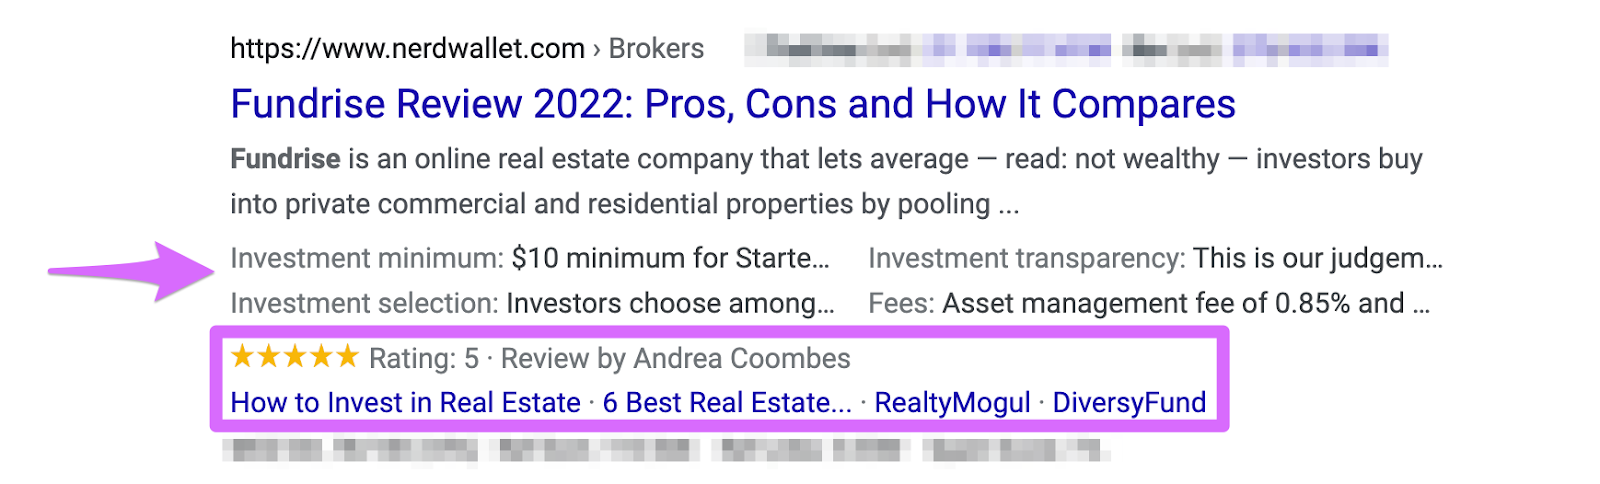 rich snippet examples displayed in serp including star rating , author, and internal links to other articles